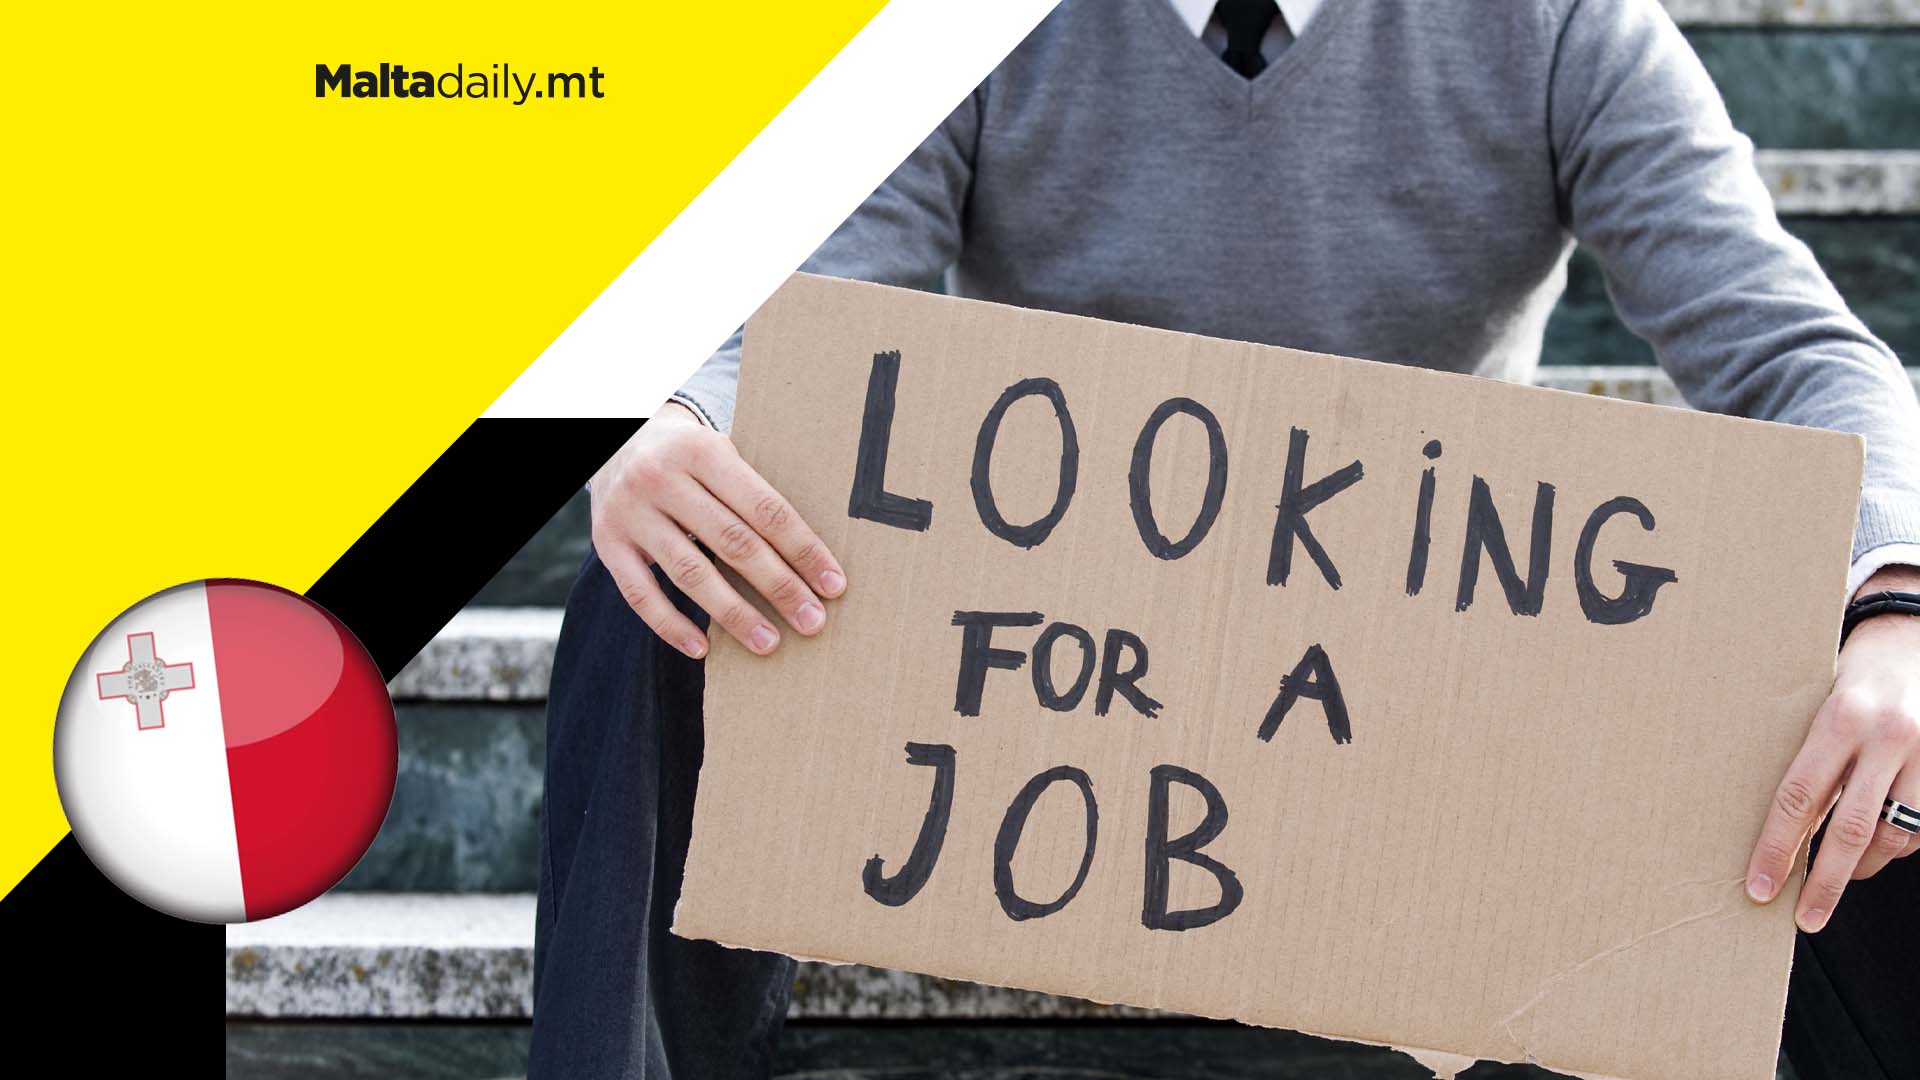 Unemployment in Malta remains lowest in Europe